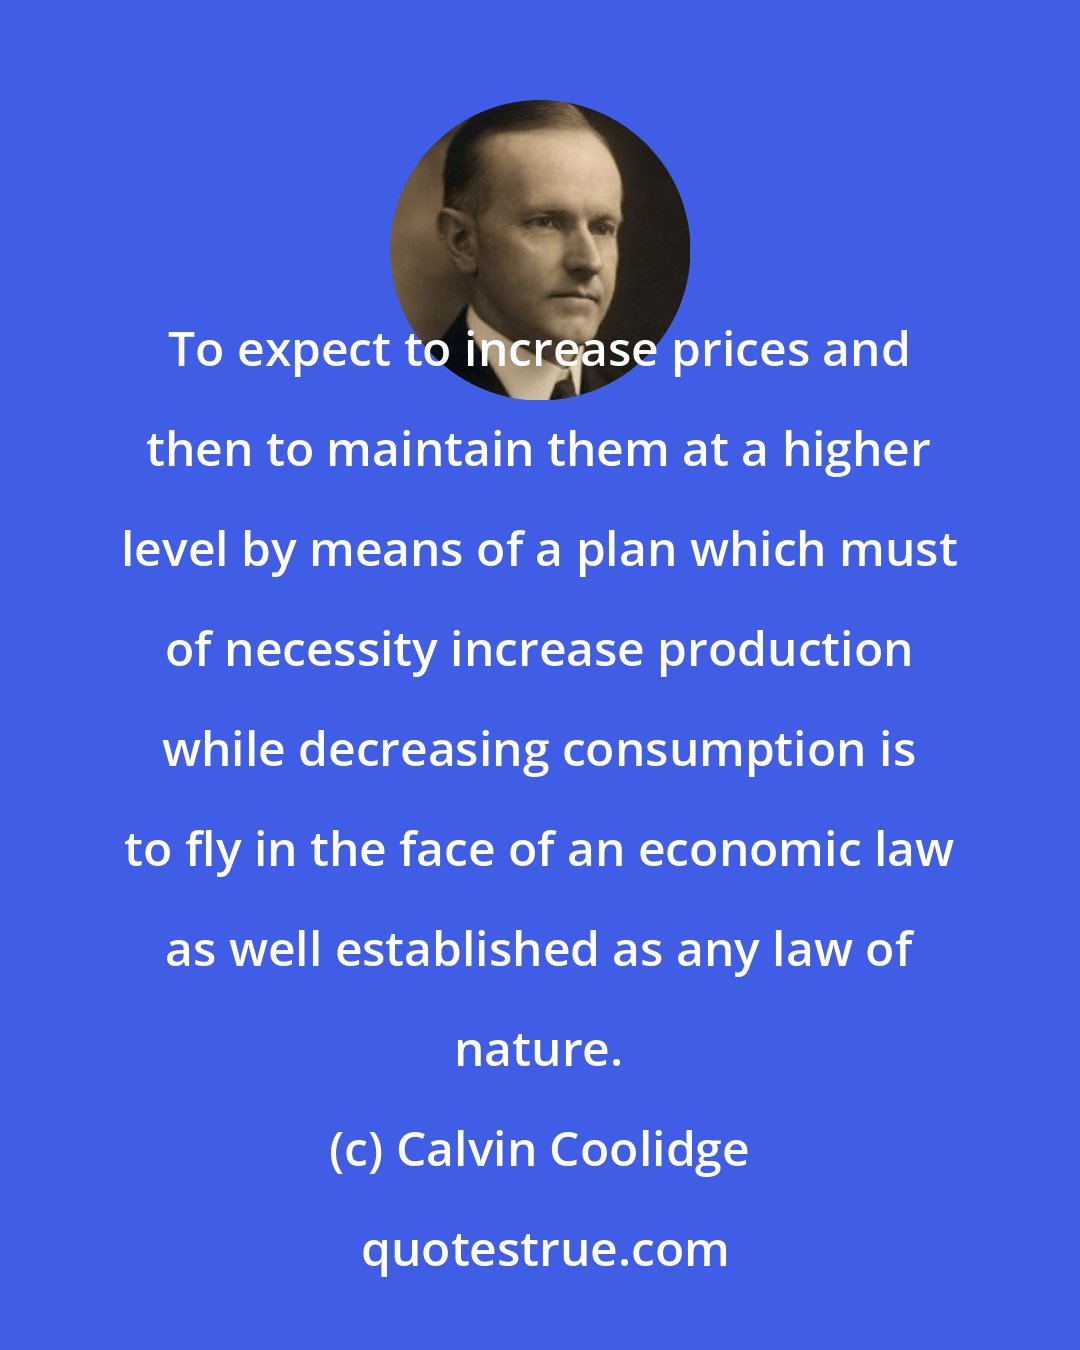 Calvin Coolidge: To expect to increase prices and then to maintain them at a higher level by means of a plan which must of necessity increase production while decreasing consumption is to fly in the face of an economic law as well established as any law of nature.